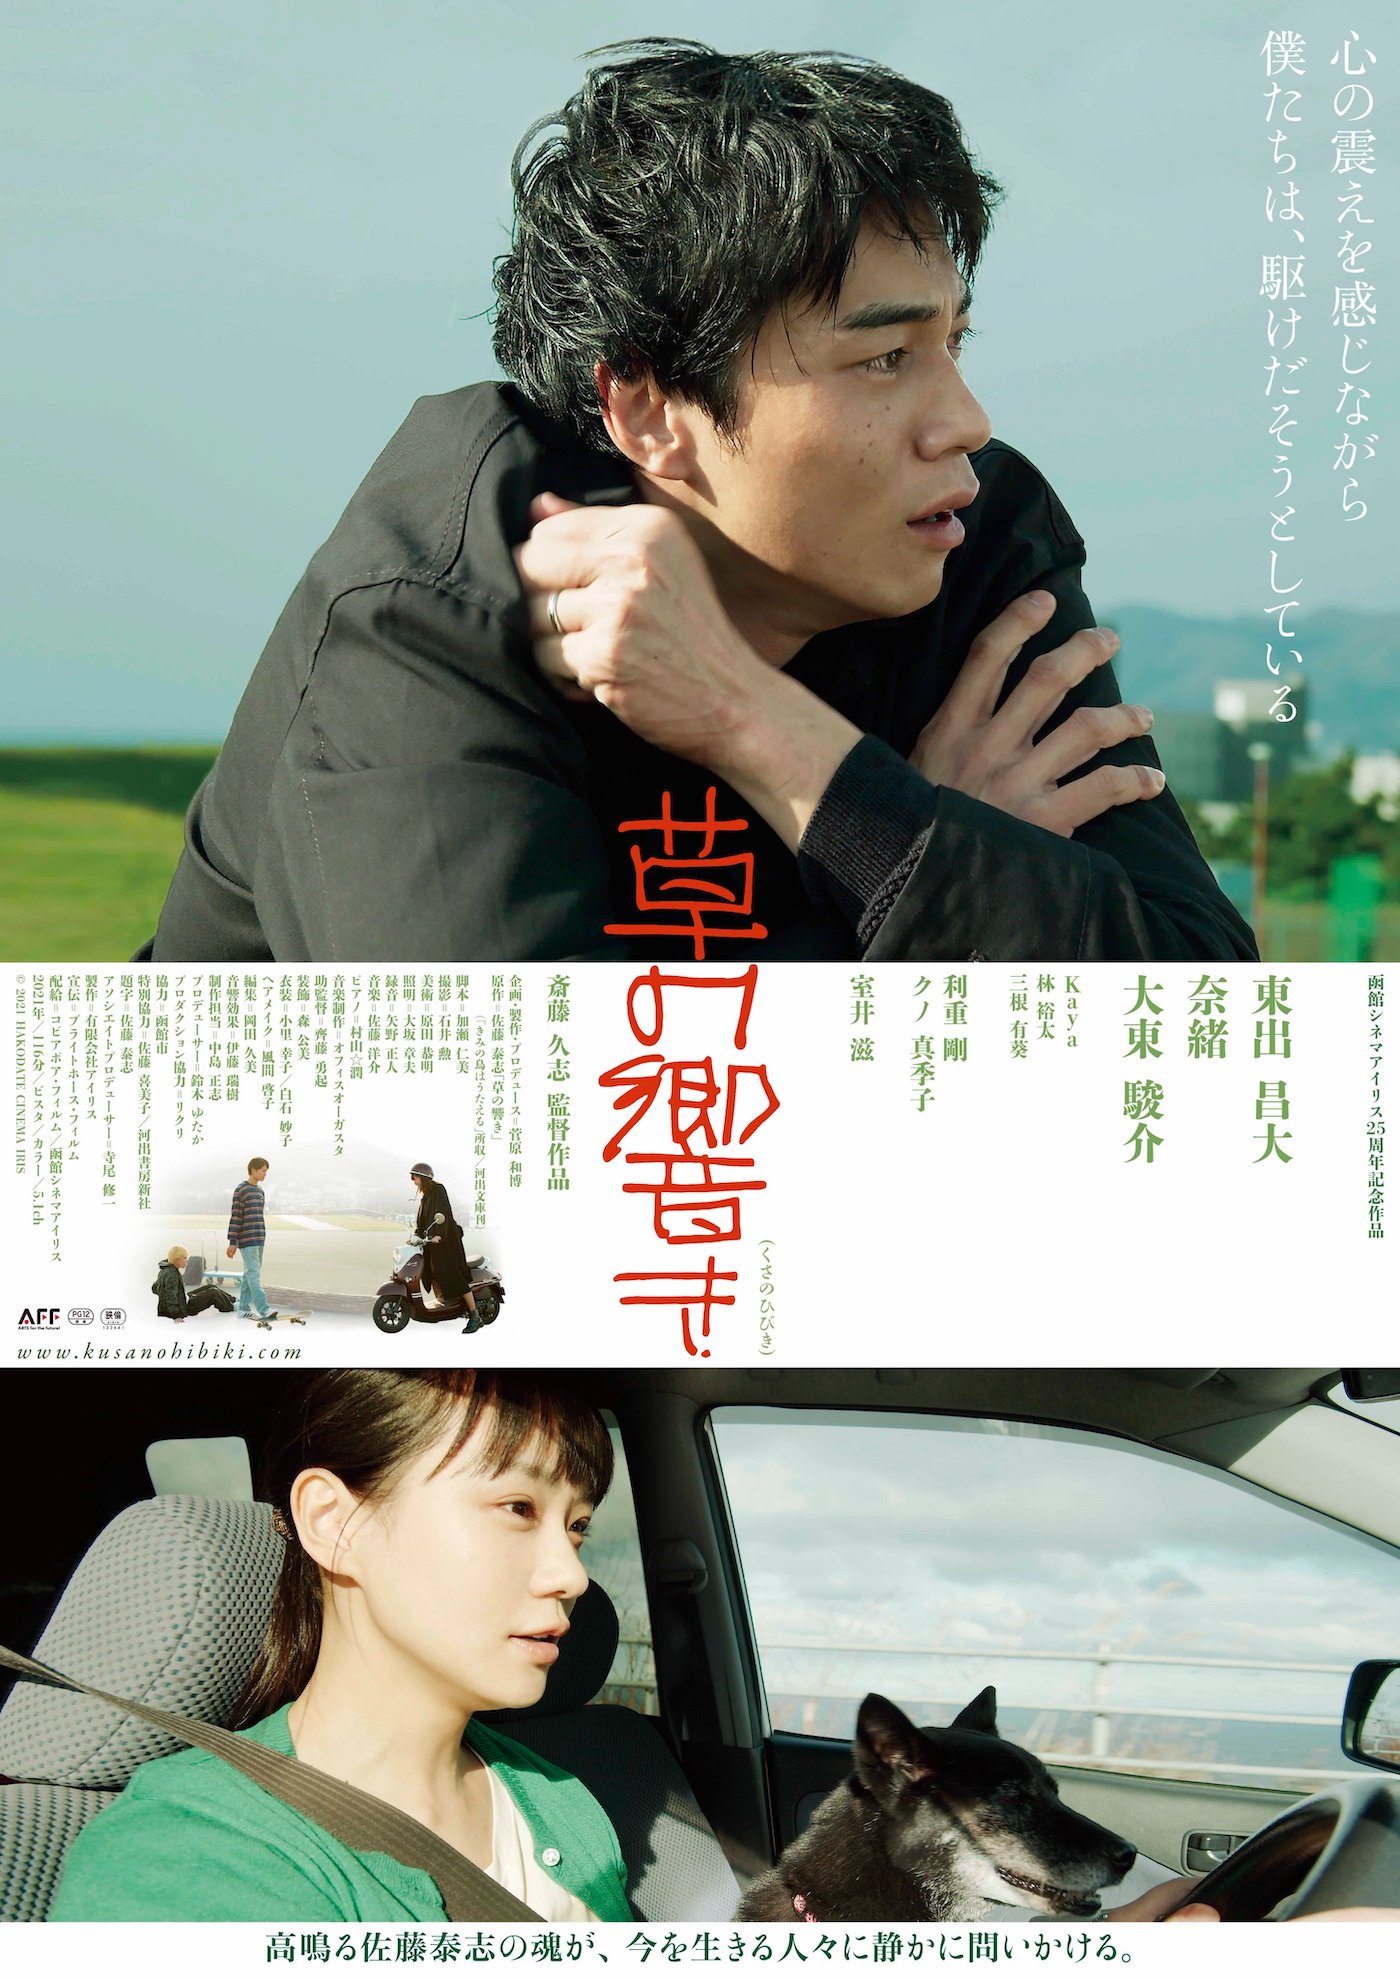 Tokyo International Film Festival | 10/28 (Thu) Competition Section 